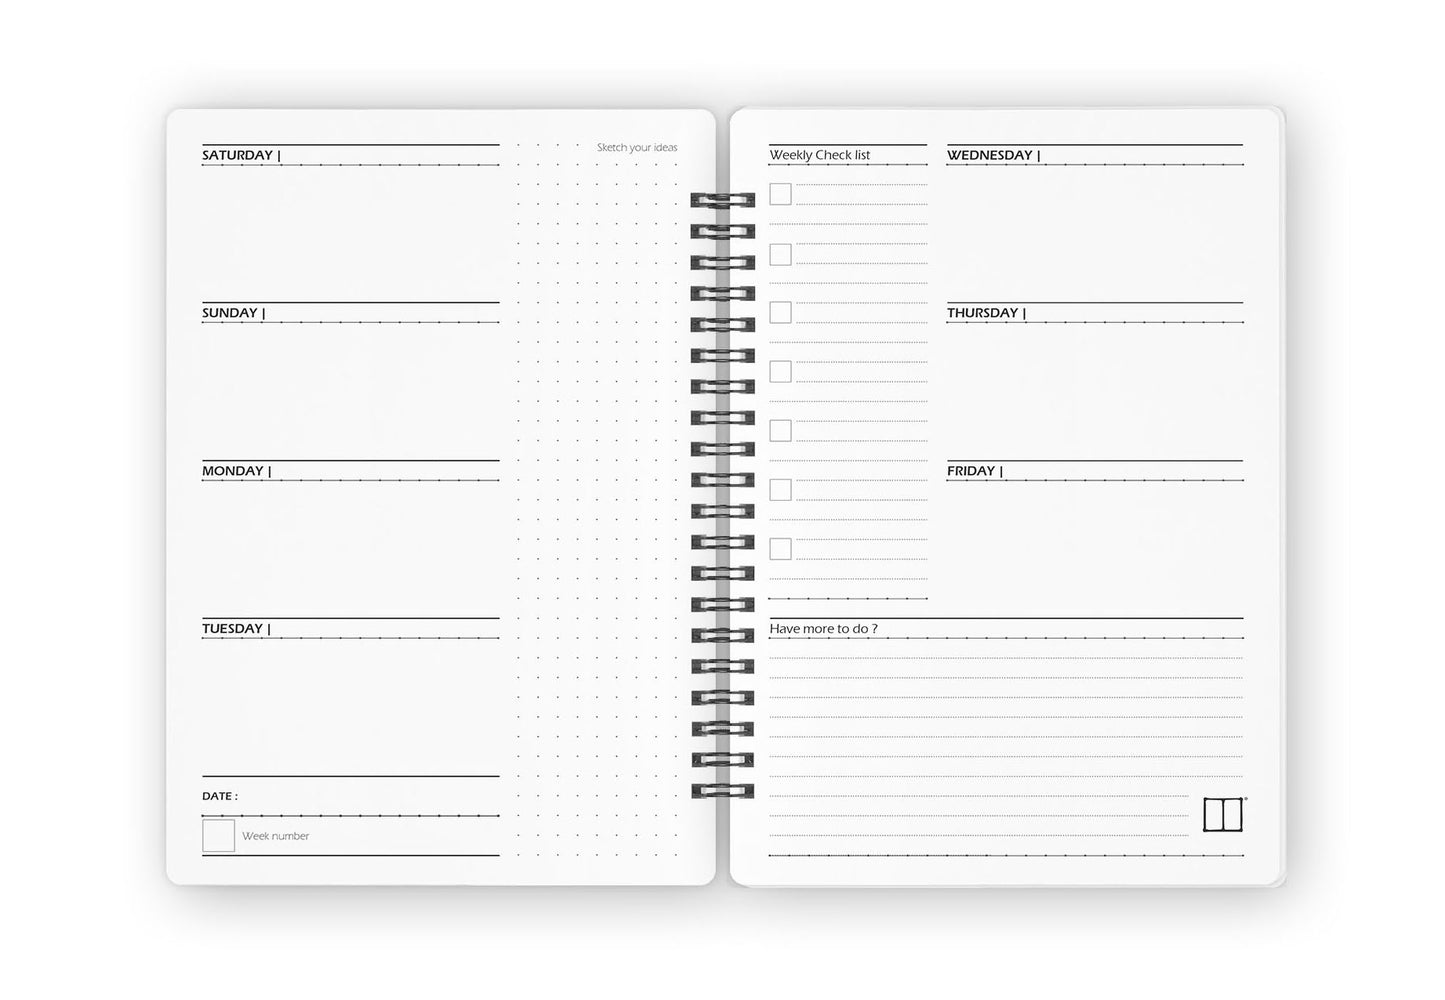 Weekly Planner Notebook | 20 X 14 cm - (52 Weeks + 50 Lined Pages) - Dream Catcher - from SketchBook Stationery